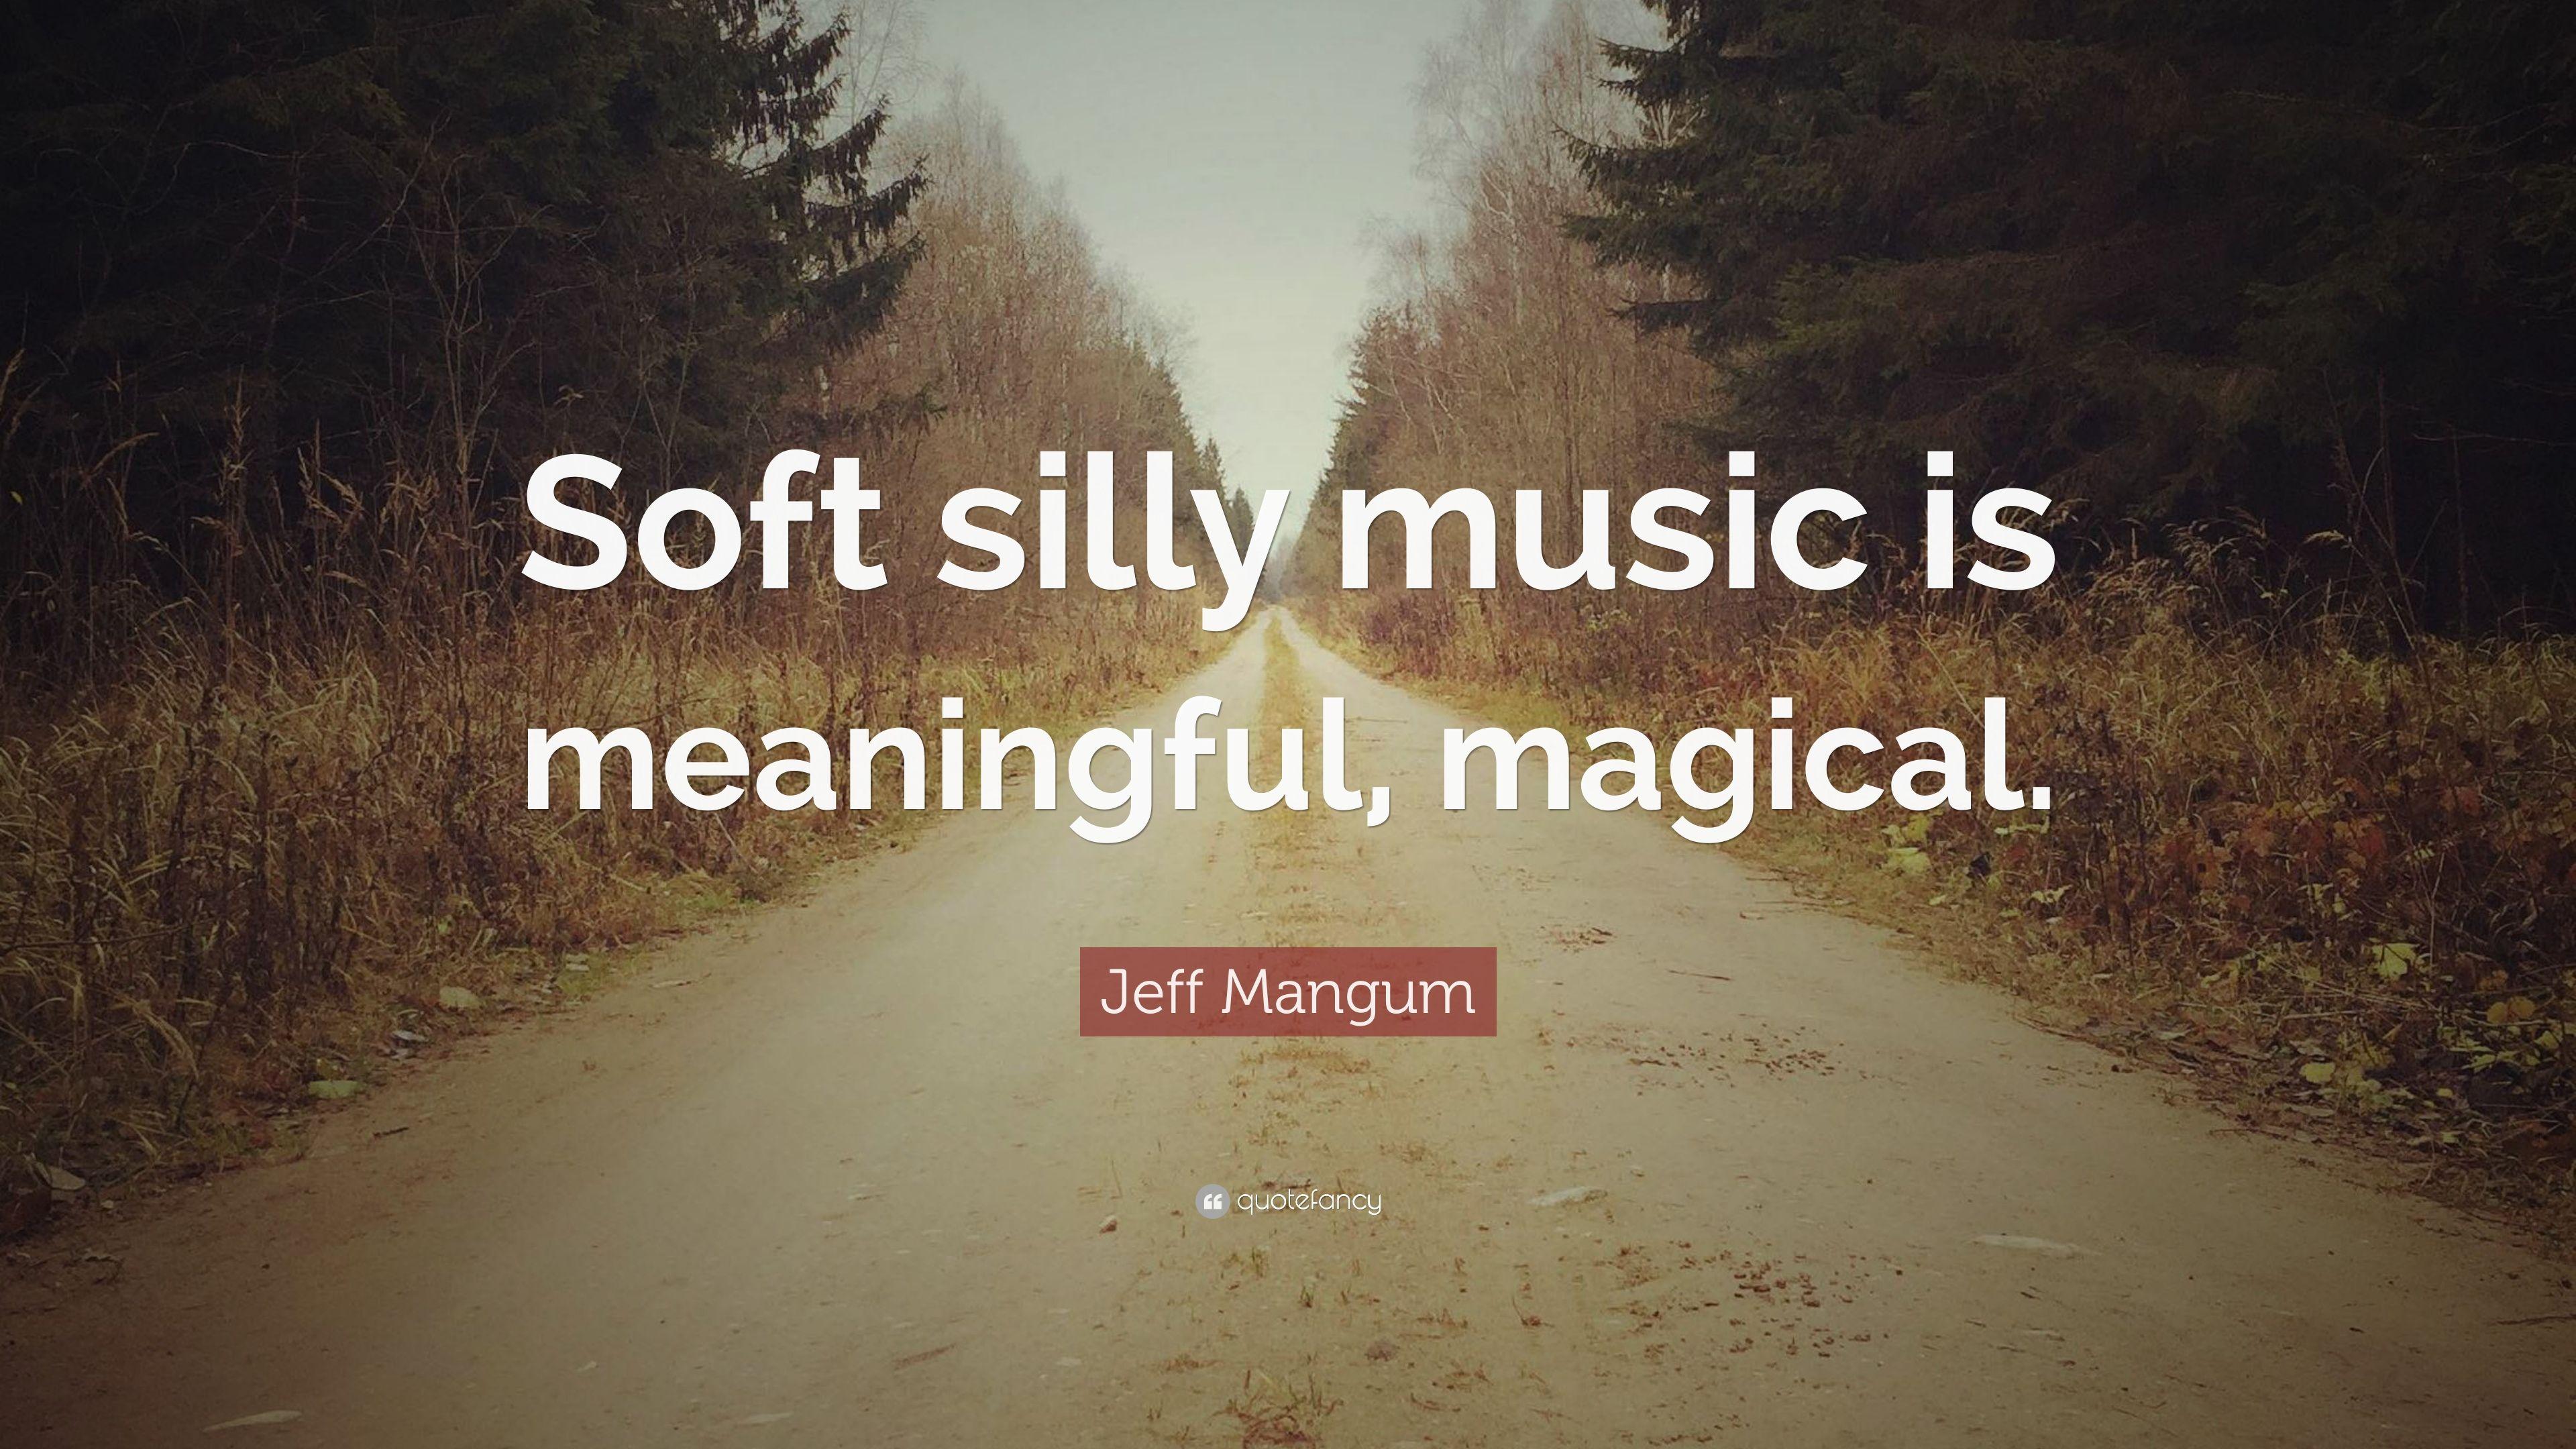 Jeff Mangum Quote: “Soft silly music is meaningful, magical.” 9